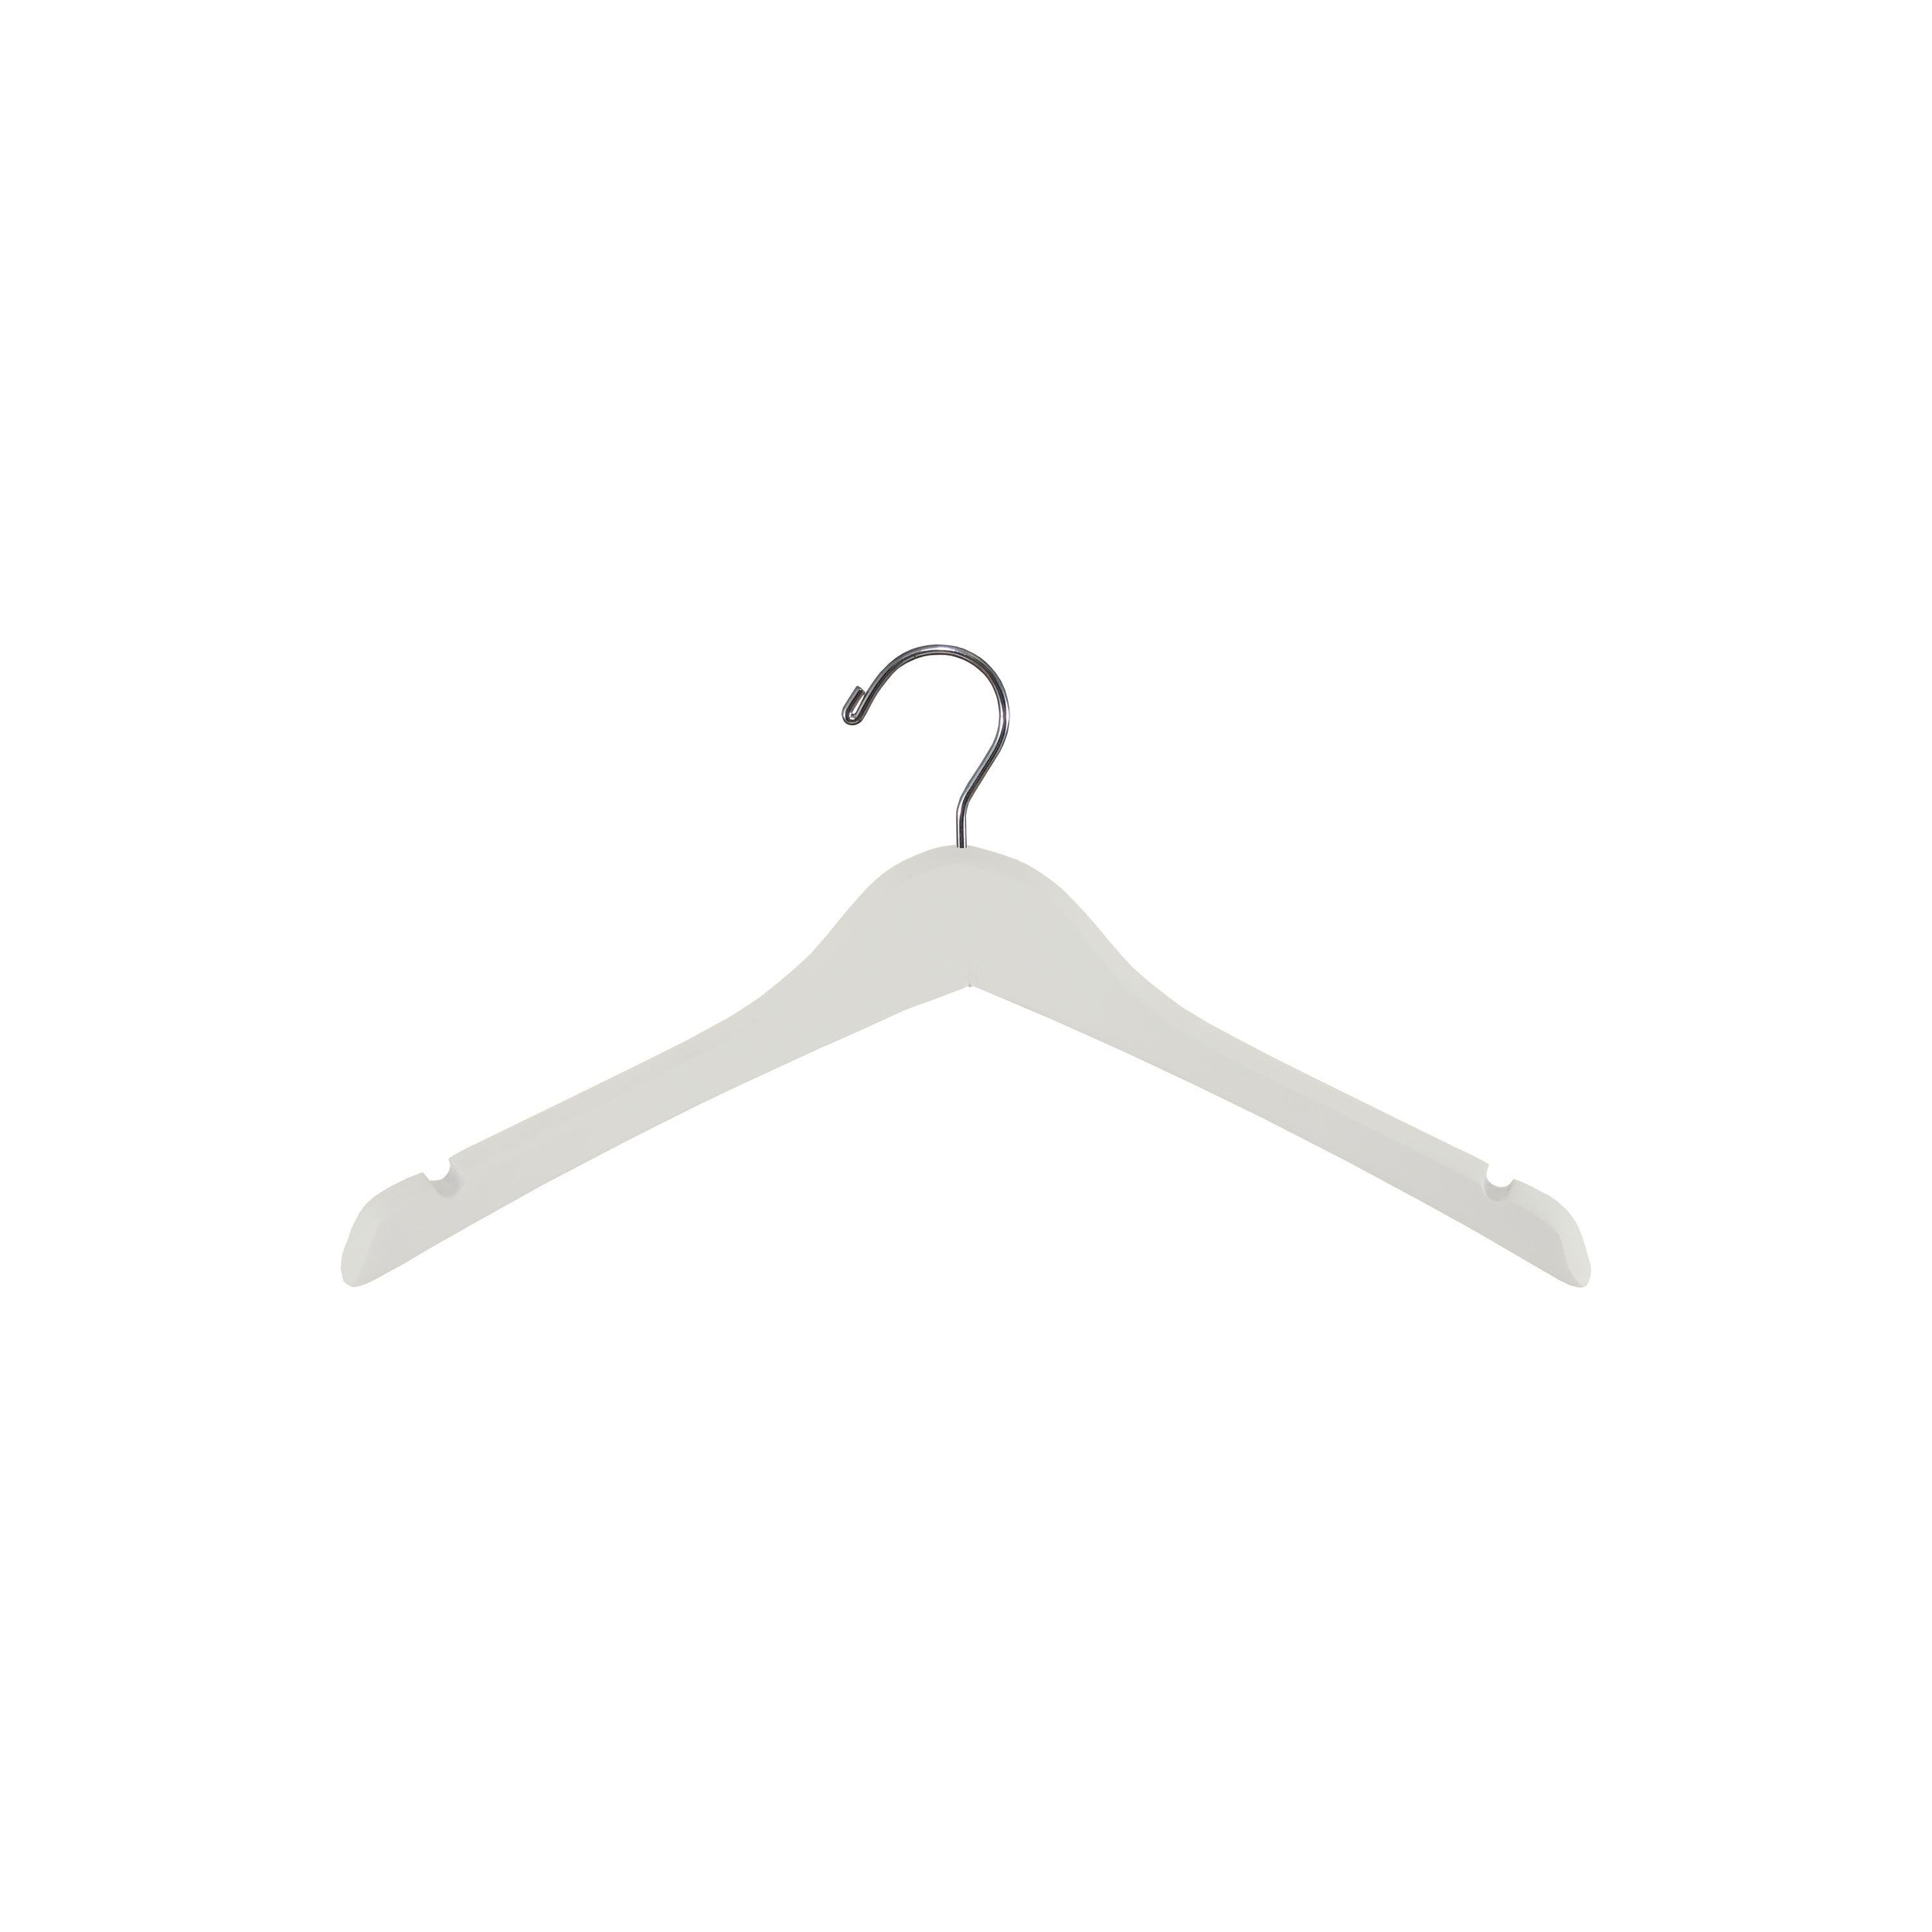 https://ak1.ostkcdn.com/images/products/is/images/direct/9fd6a27c6b69d42bacd32f3e8c2a6fbf93942e10/Deluxe-White-Rubber-Coated-Wooden-Coat-Dress-Hanger%2C-17%22-Length-x-1%22-Thick-Chrome-Hook-Box-of-12.jpg